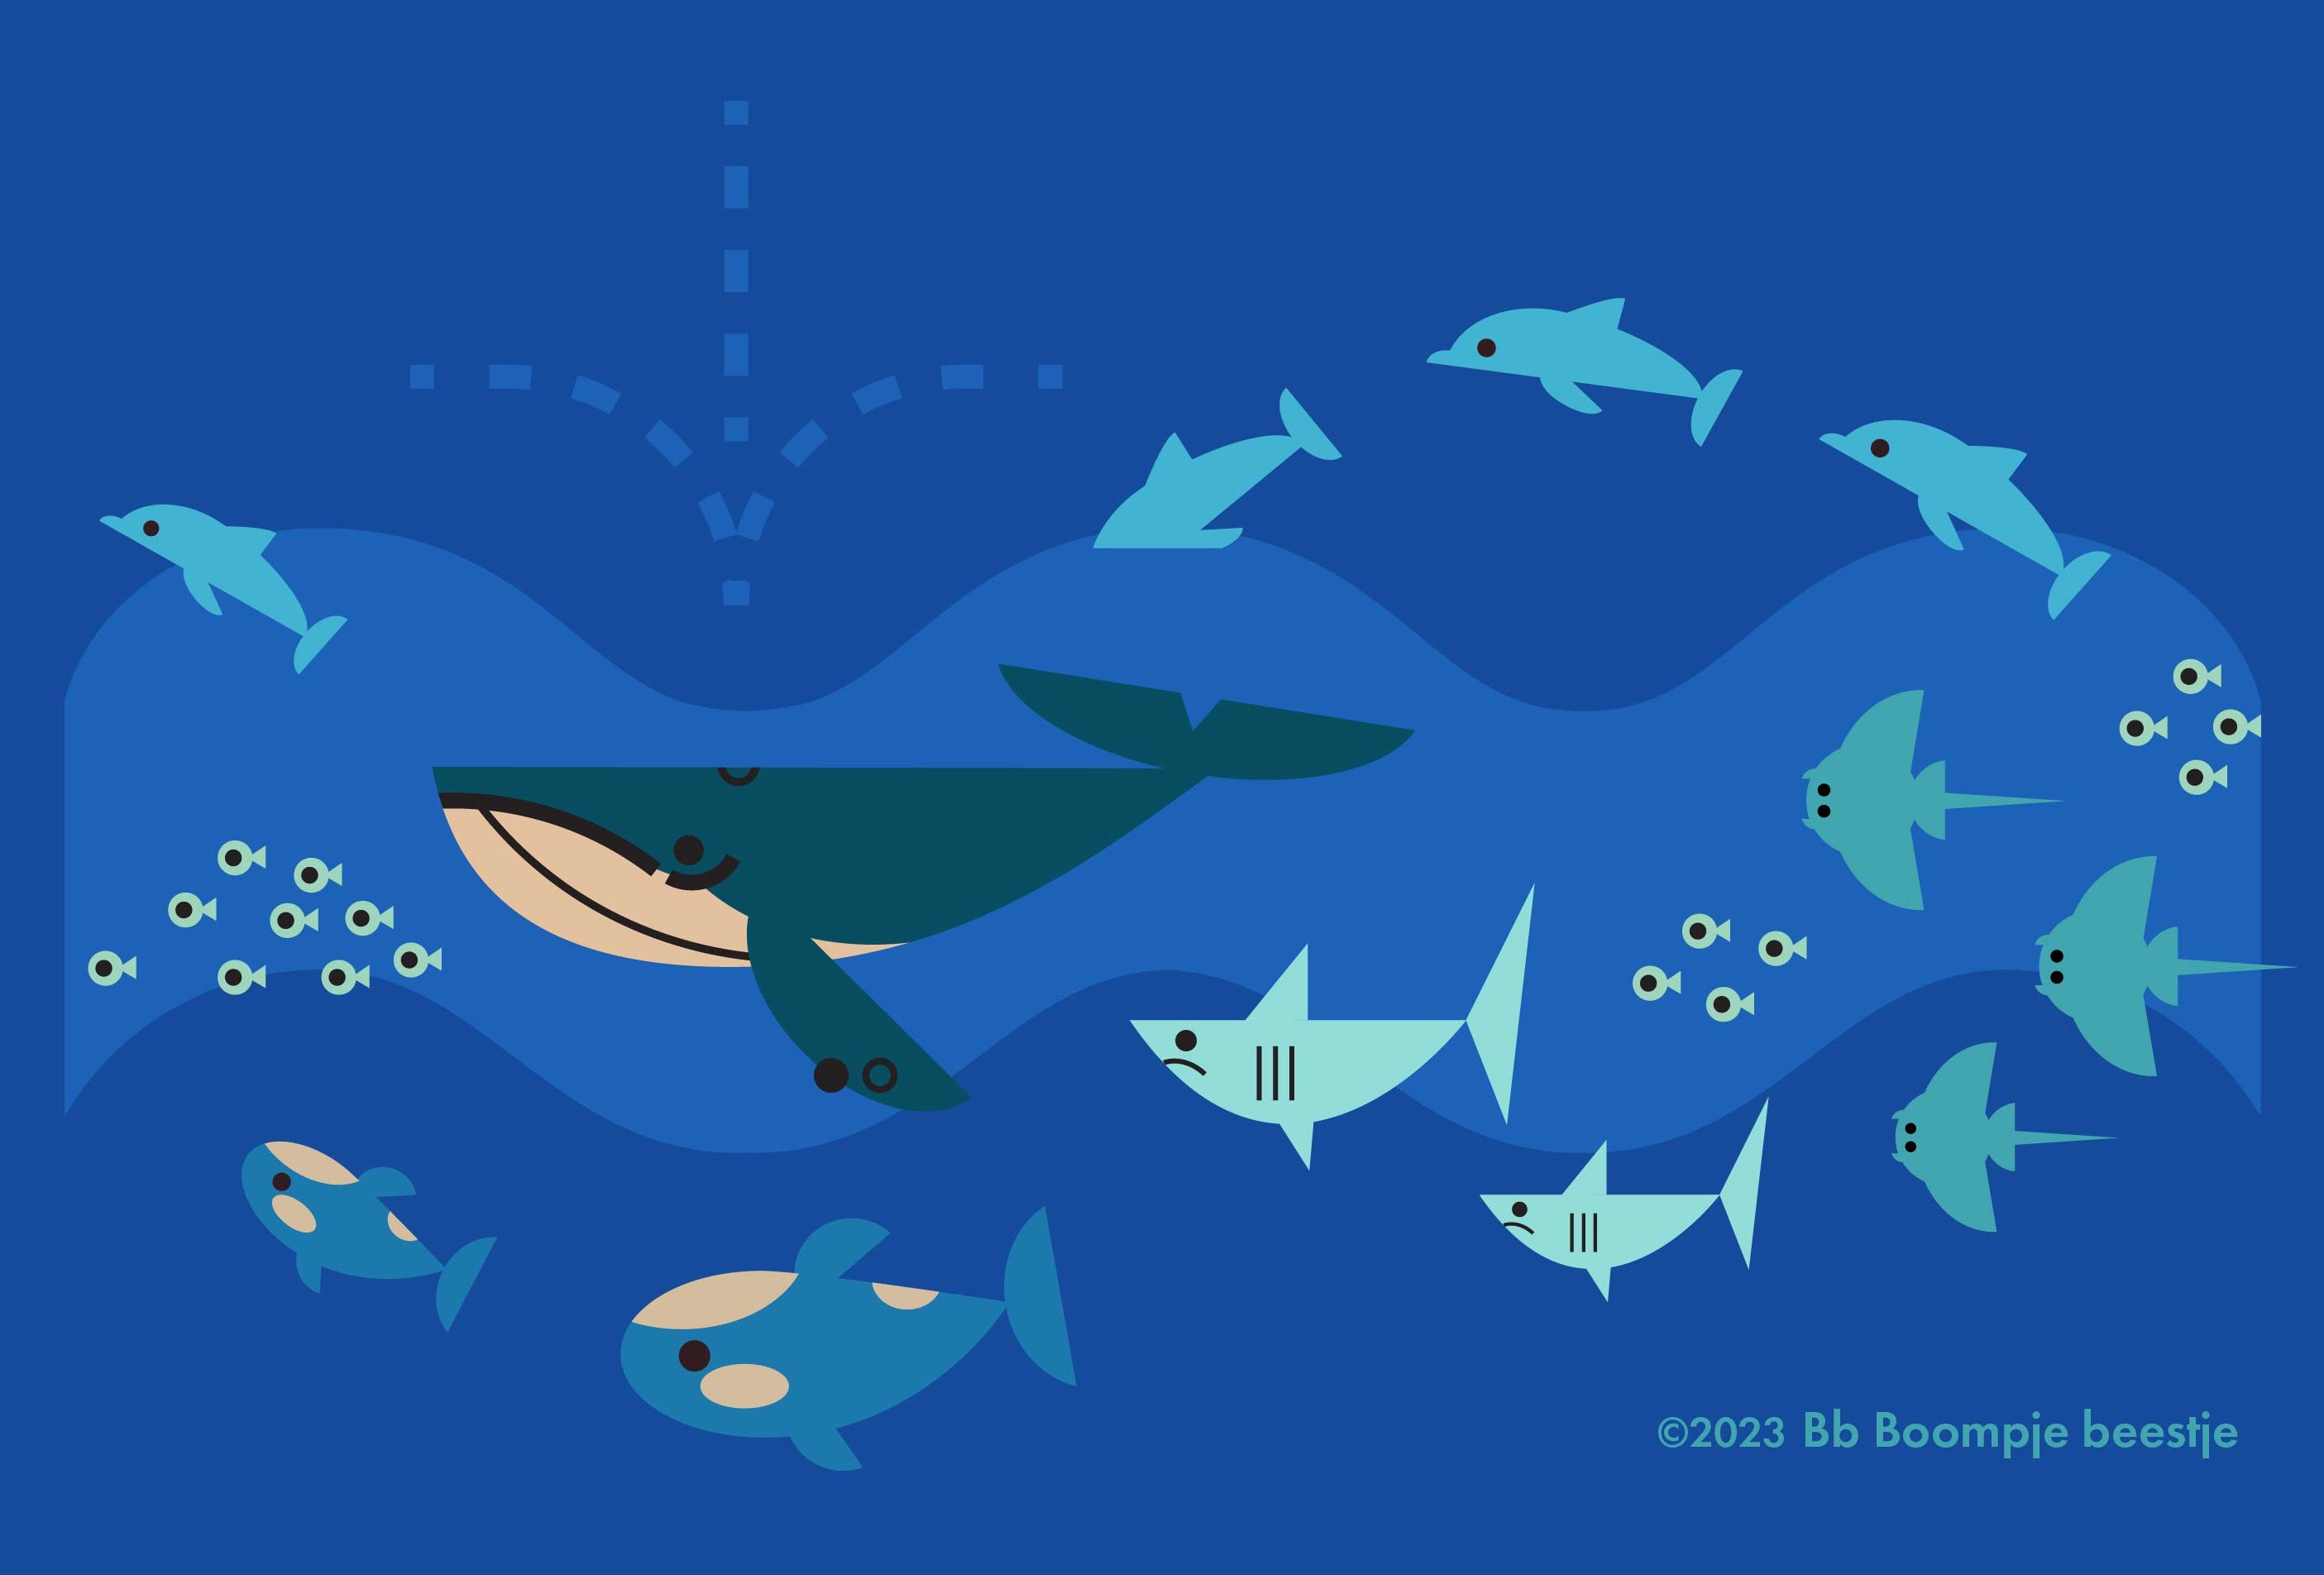 Ocean animals like whale, orcas, shark, dolphins, stingrays and small fish in the sea illustration art.